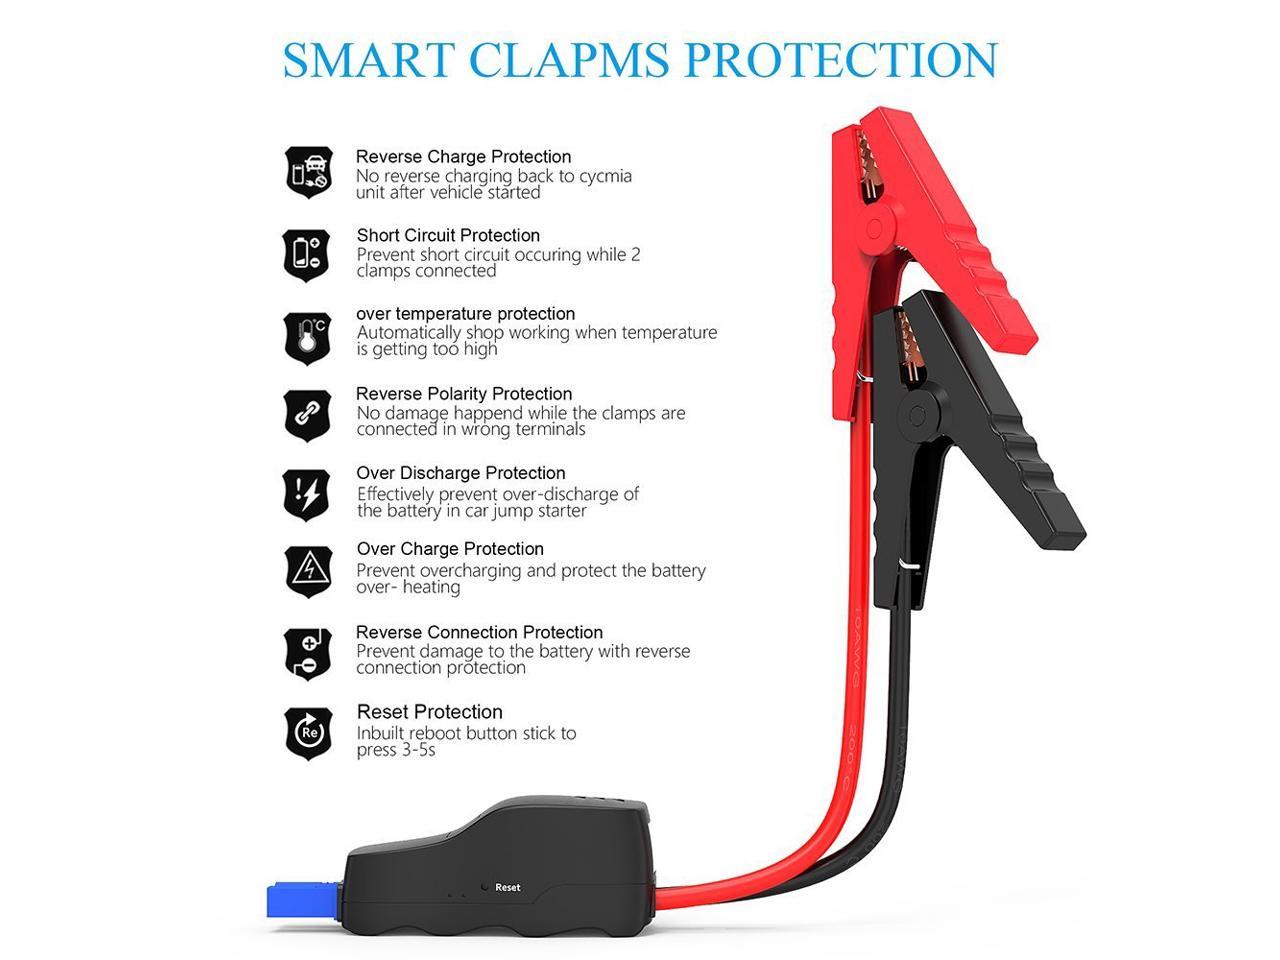 iClever 15000mAh Portable Car Jump Starter Auto Battery Charger Quick Charger Power Bank Phone Charger with Smart Clamps